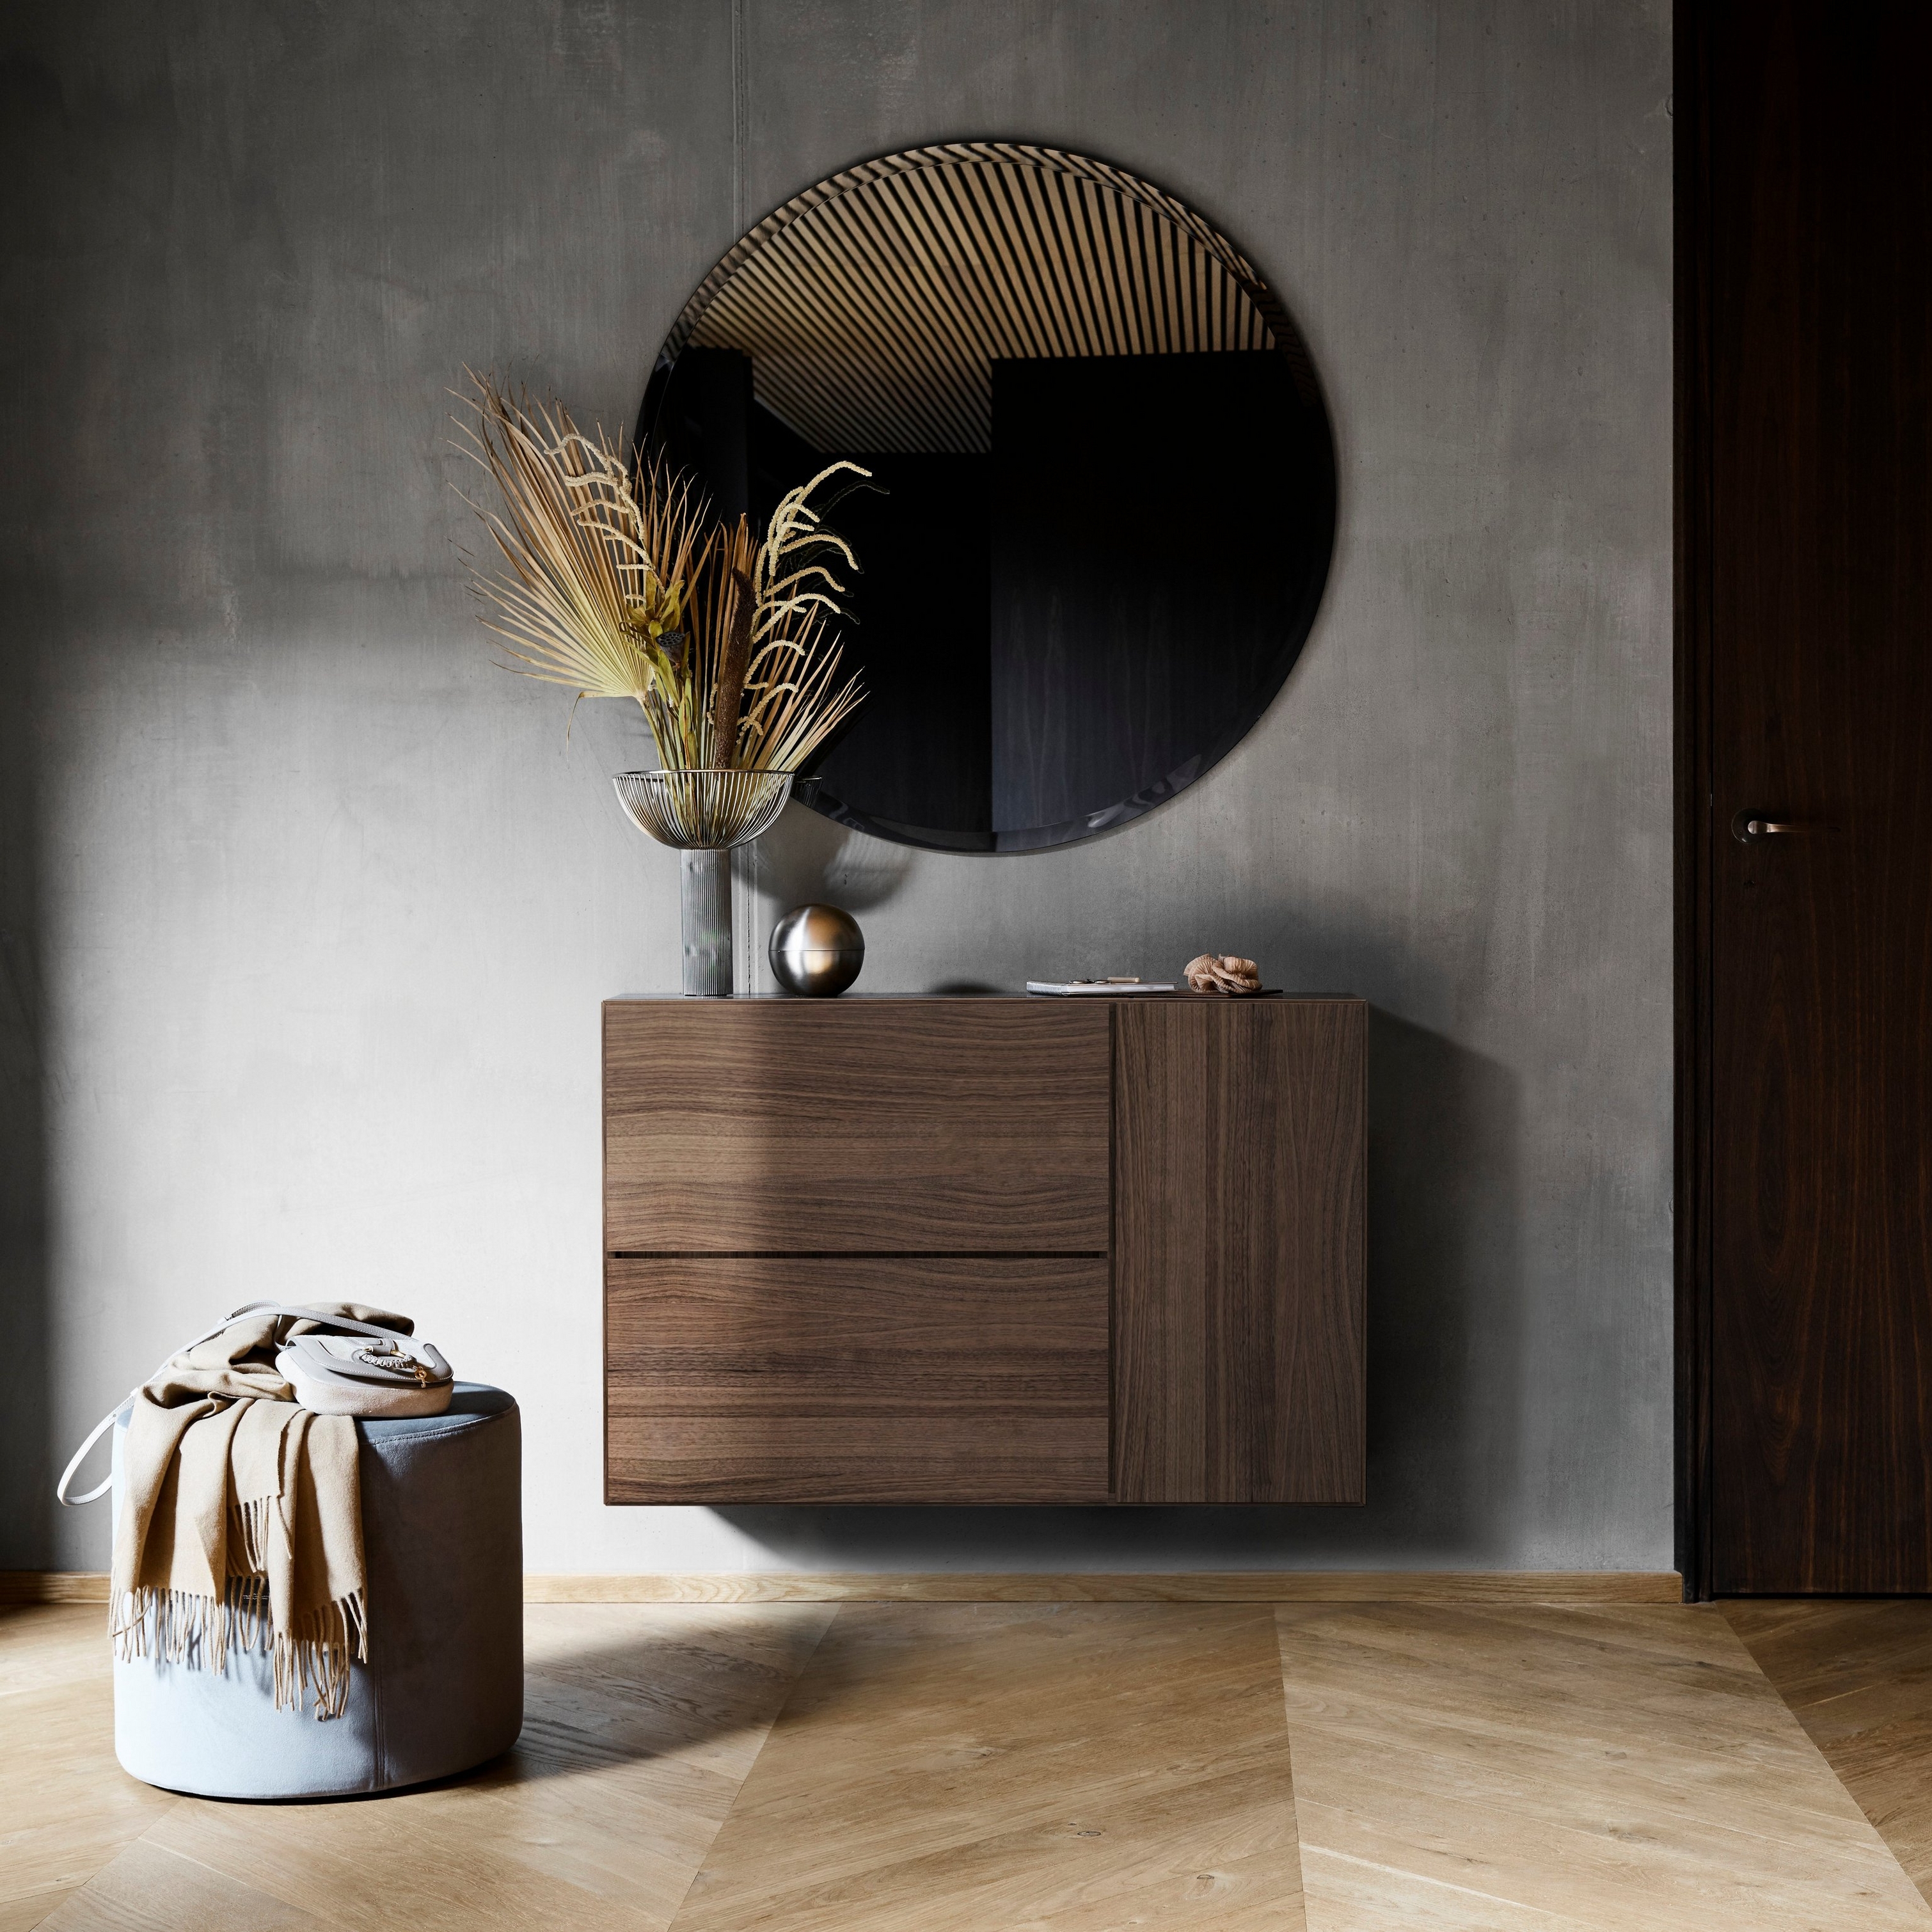 Stylish entryway with round mirror, wooden cabinet, vase with dried plants, and leather pouf.